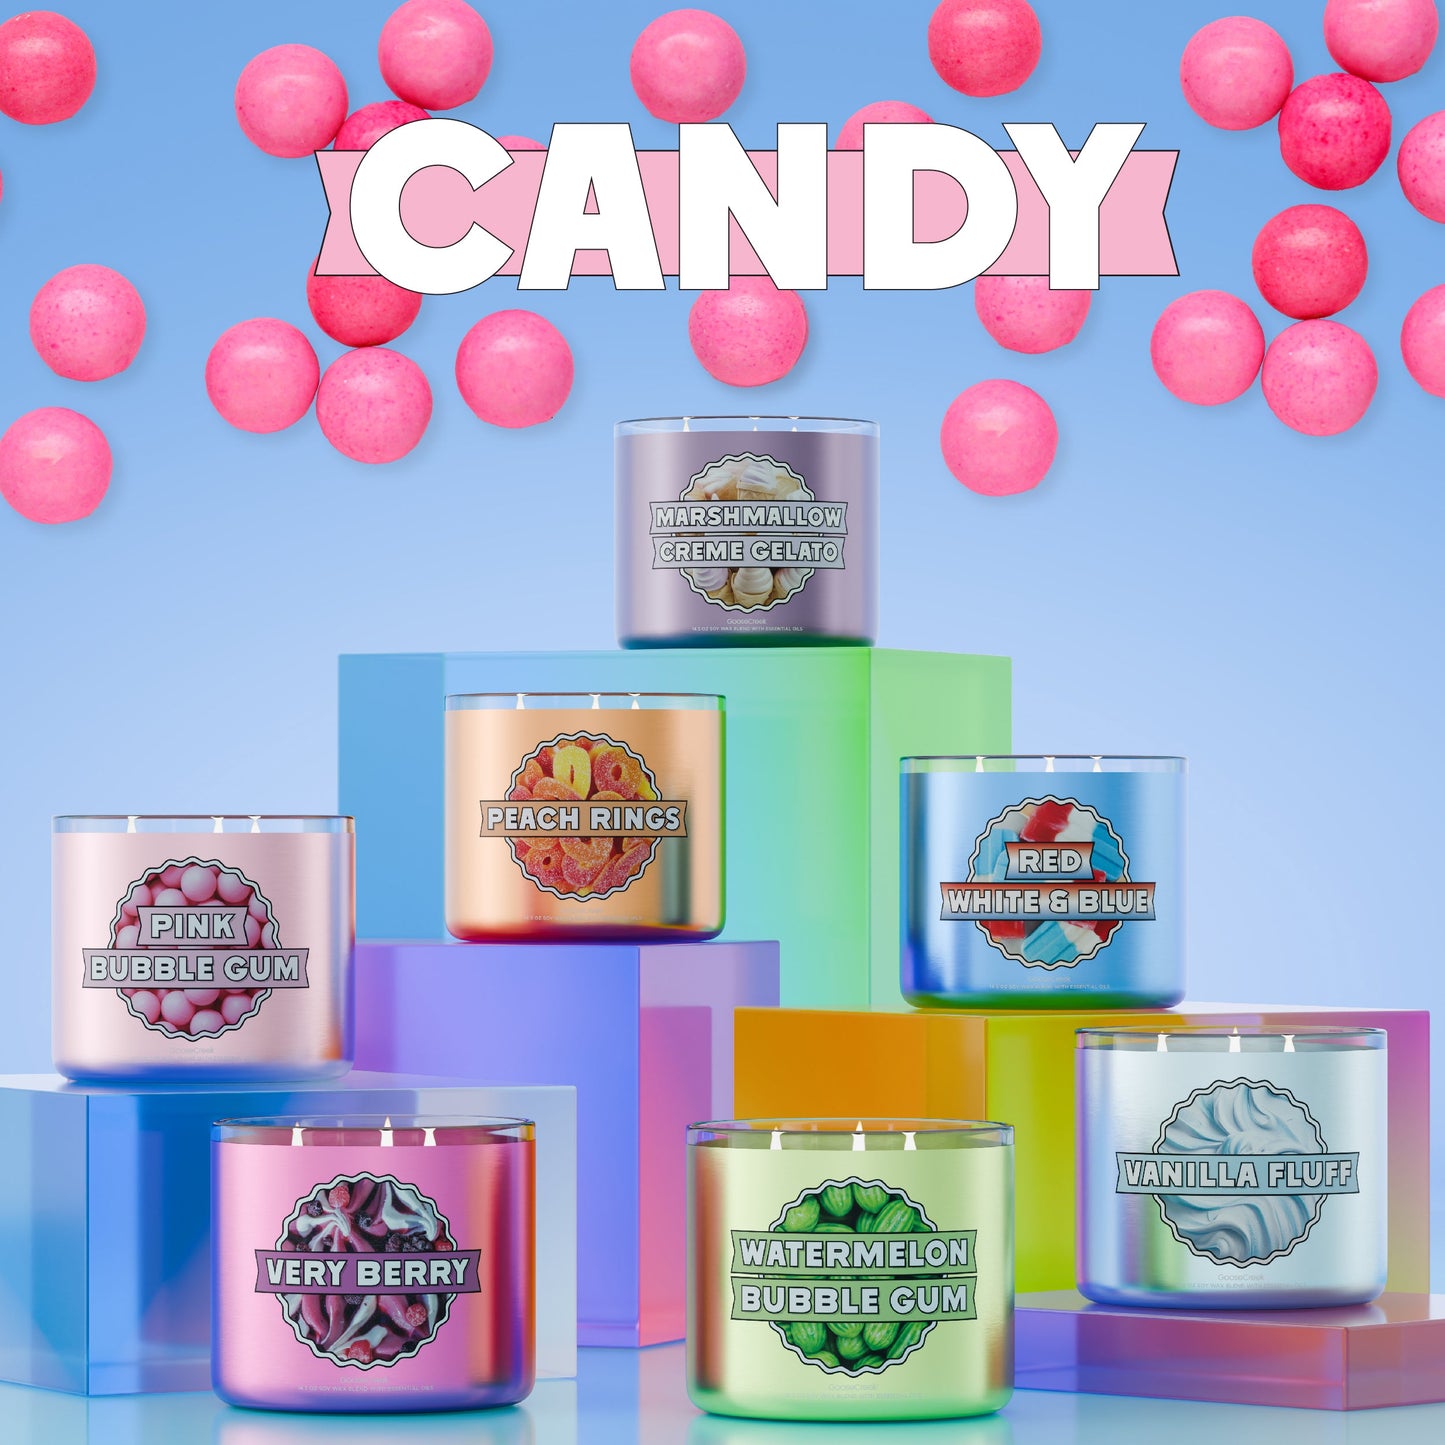 Pink Bubble Gum Large 3-Wick Candle